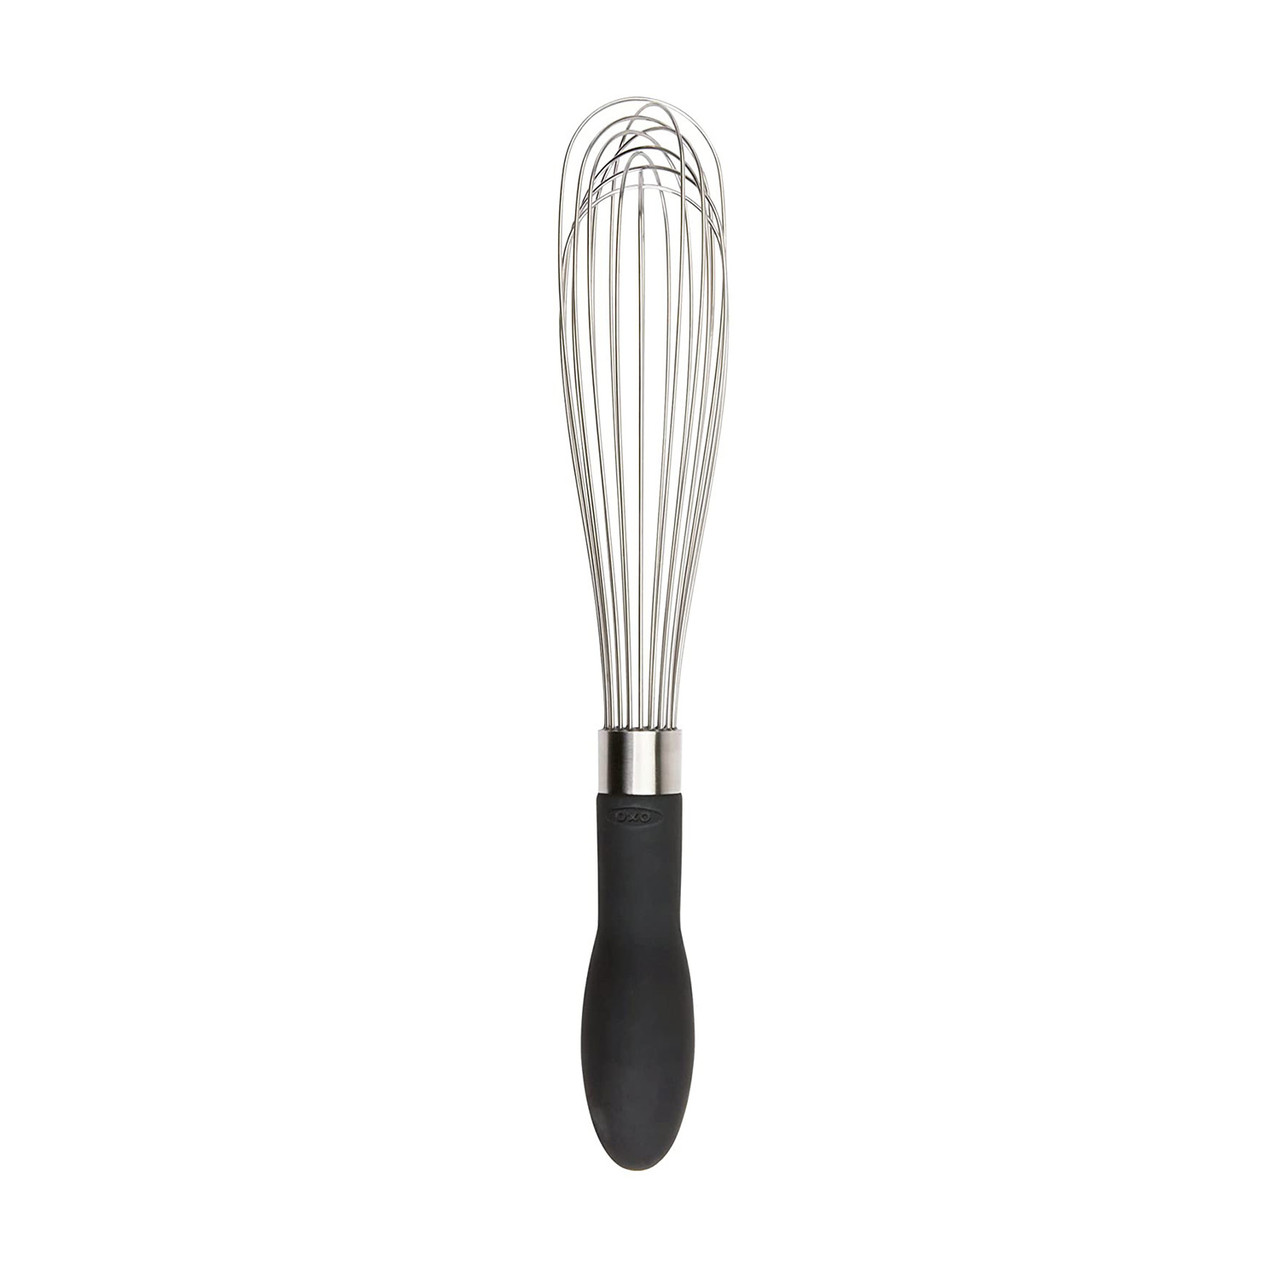 https://cdn11.bigcommerce.com/s-hccytny0od/images/stencil/1280x1280/products/4000/14659/oxo-good-grips-whisk__95893.1618141030.jpg?c=2?imbypass=on